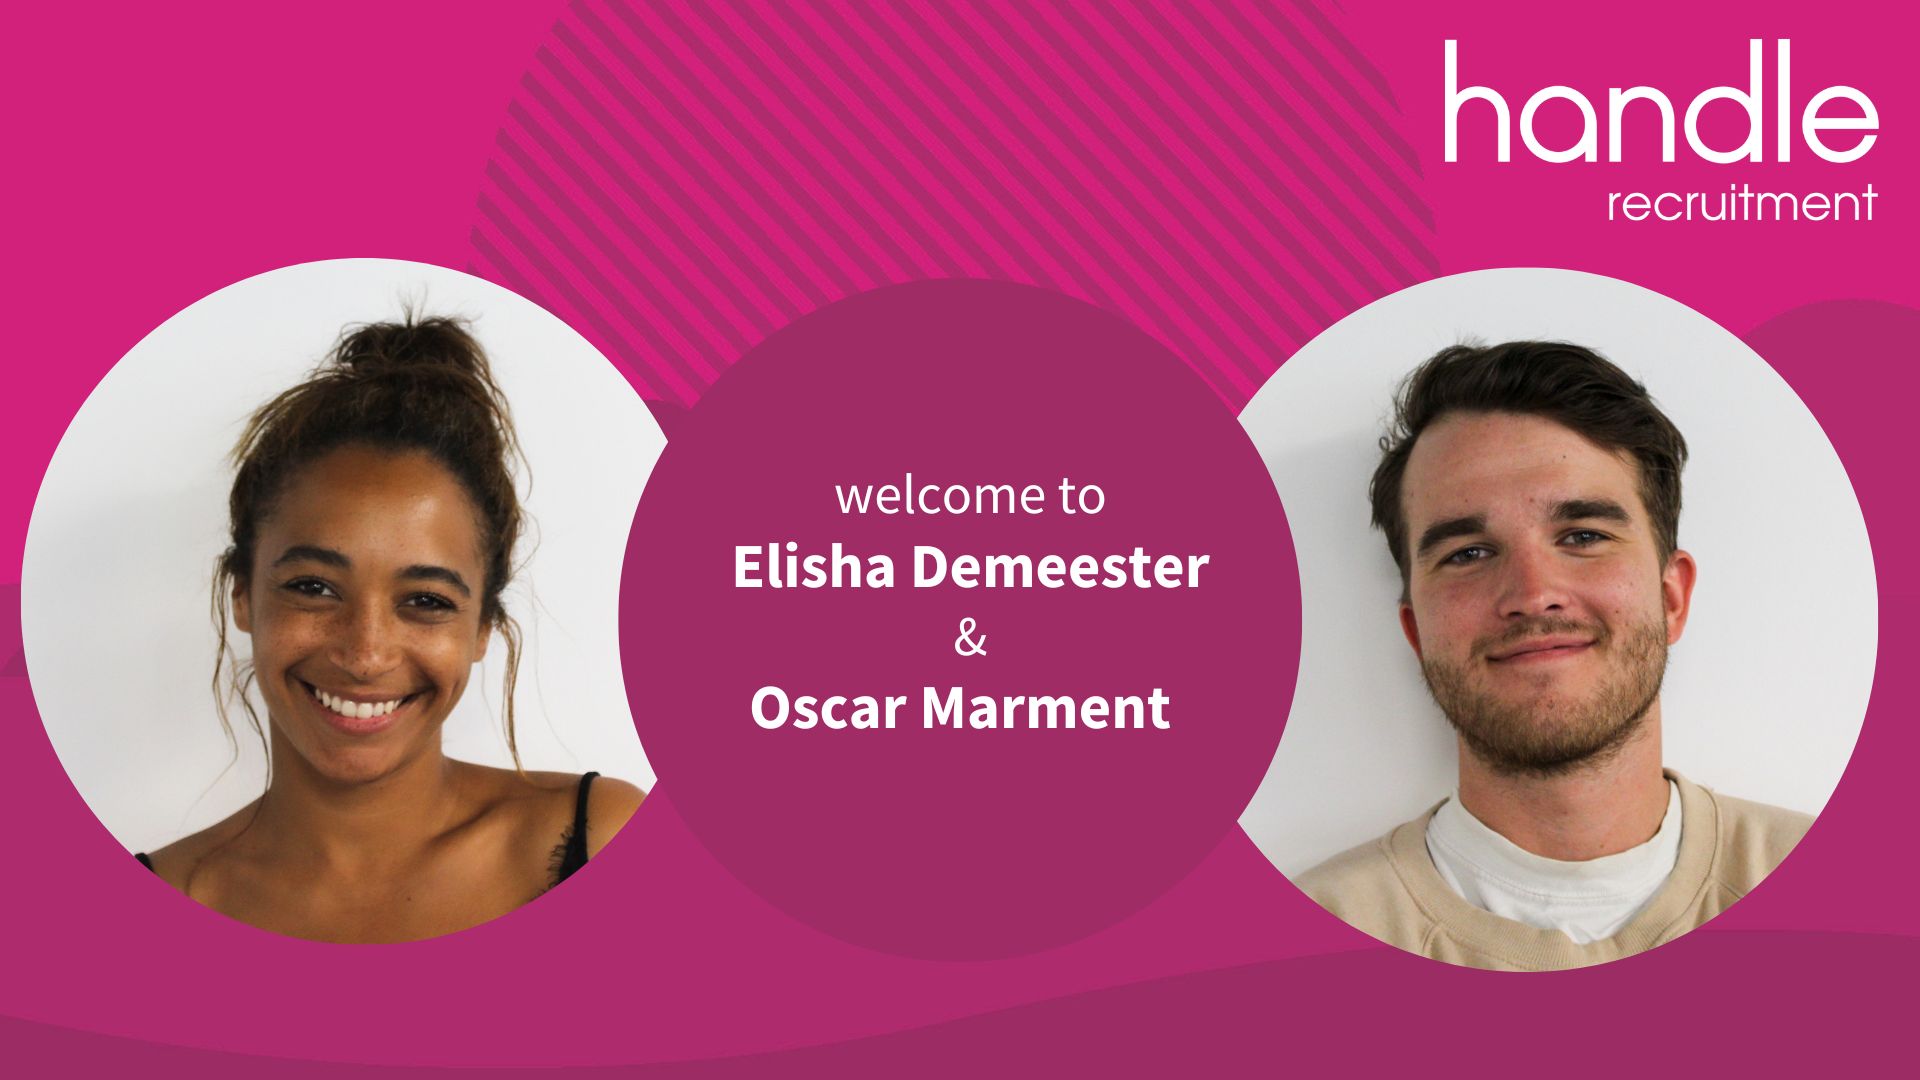 Handle Recruitment welcome Elisha Demeester and Oscar Marment to the team!